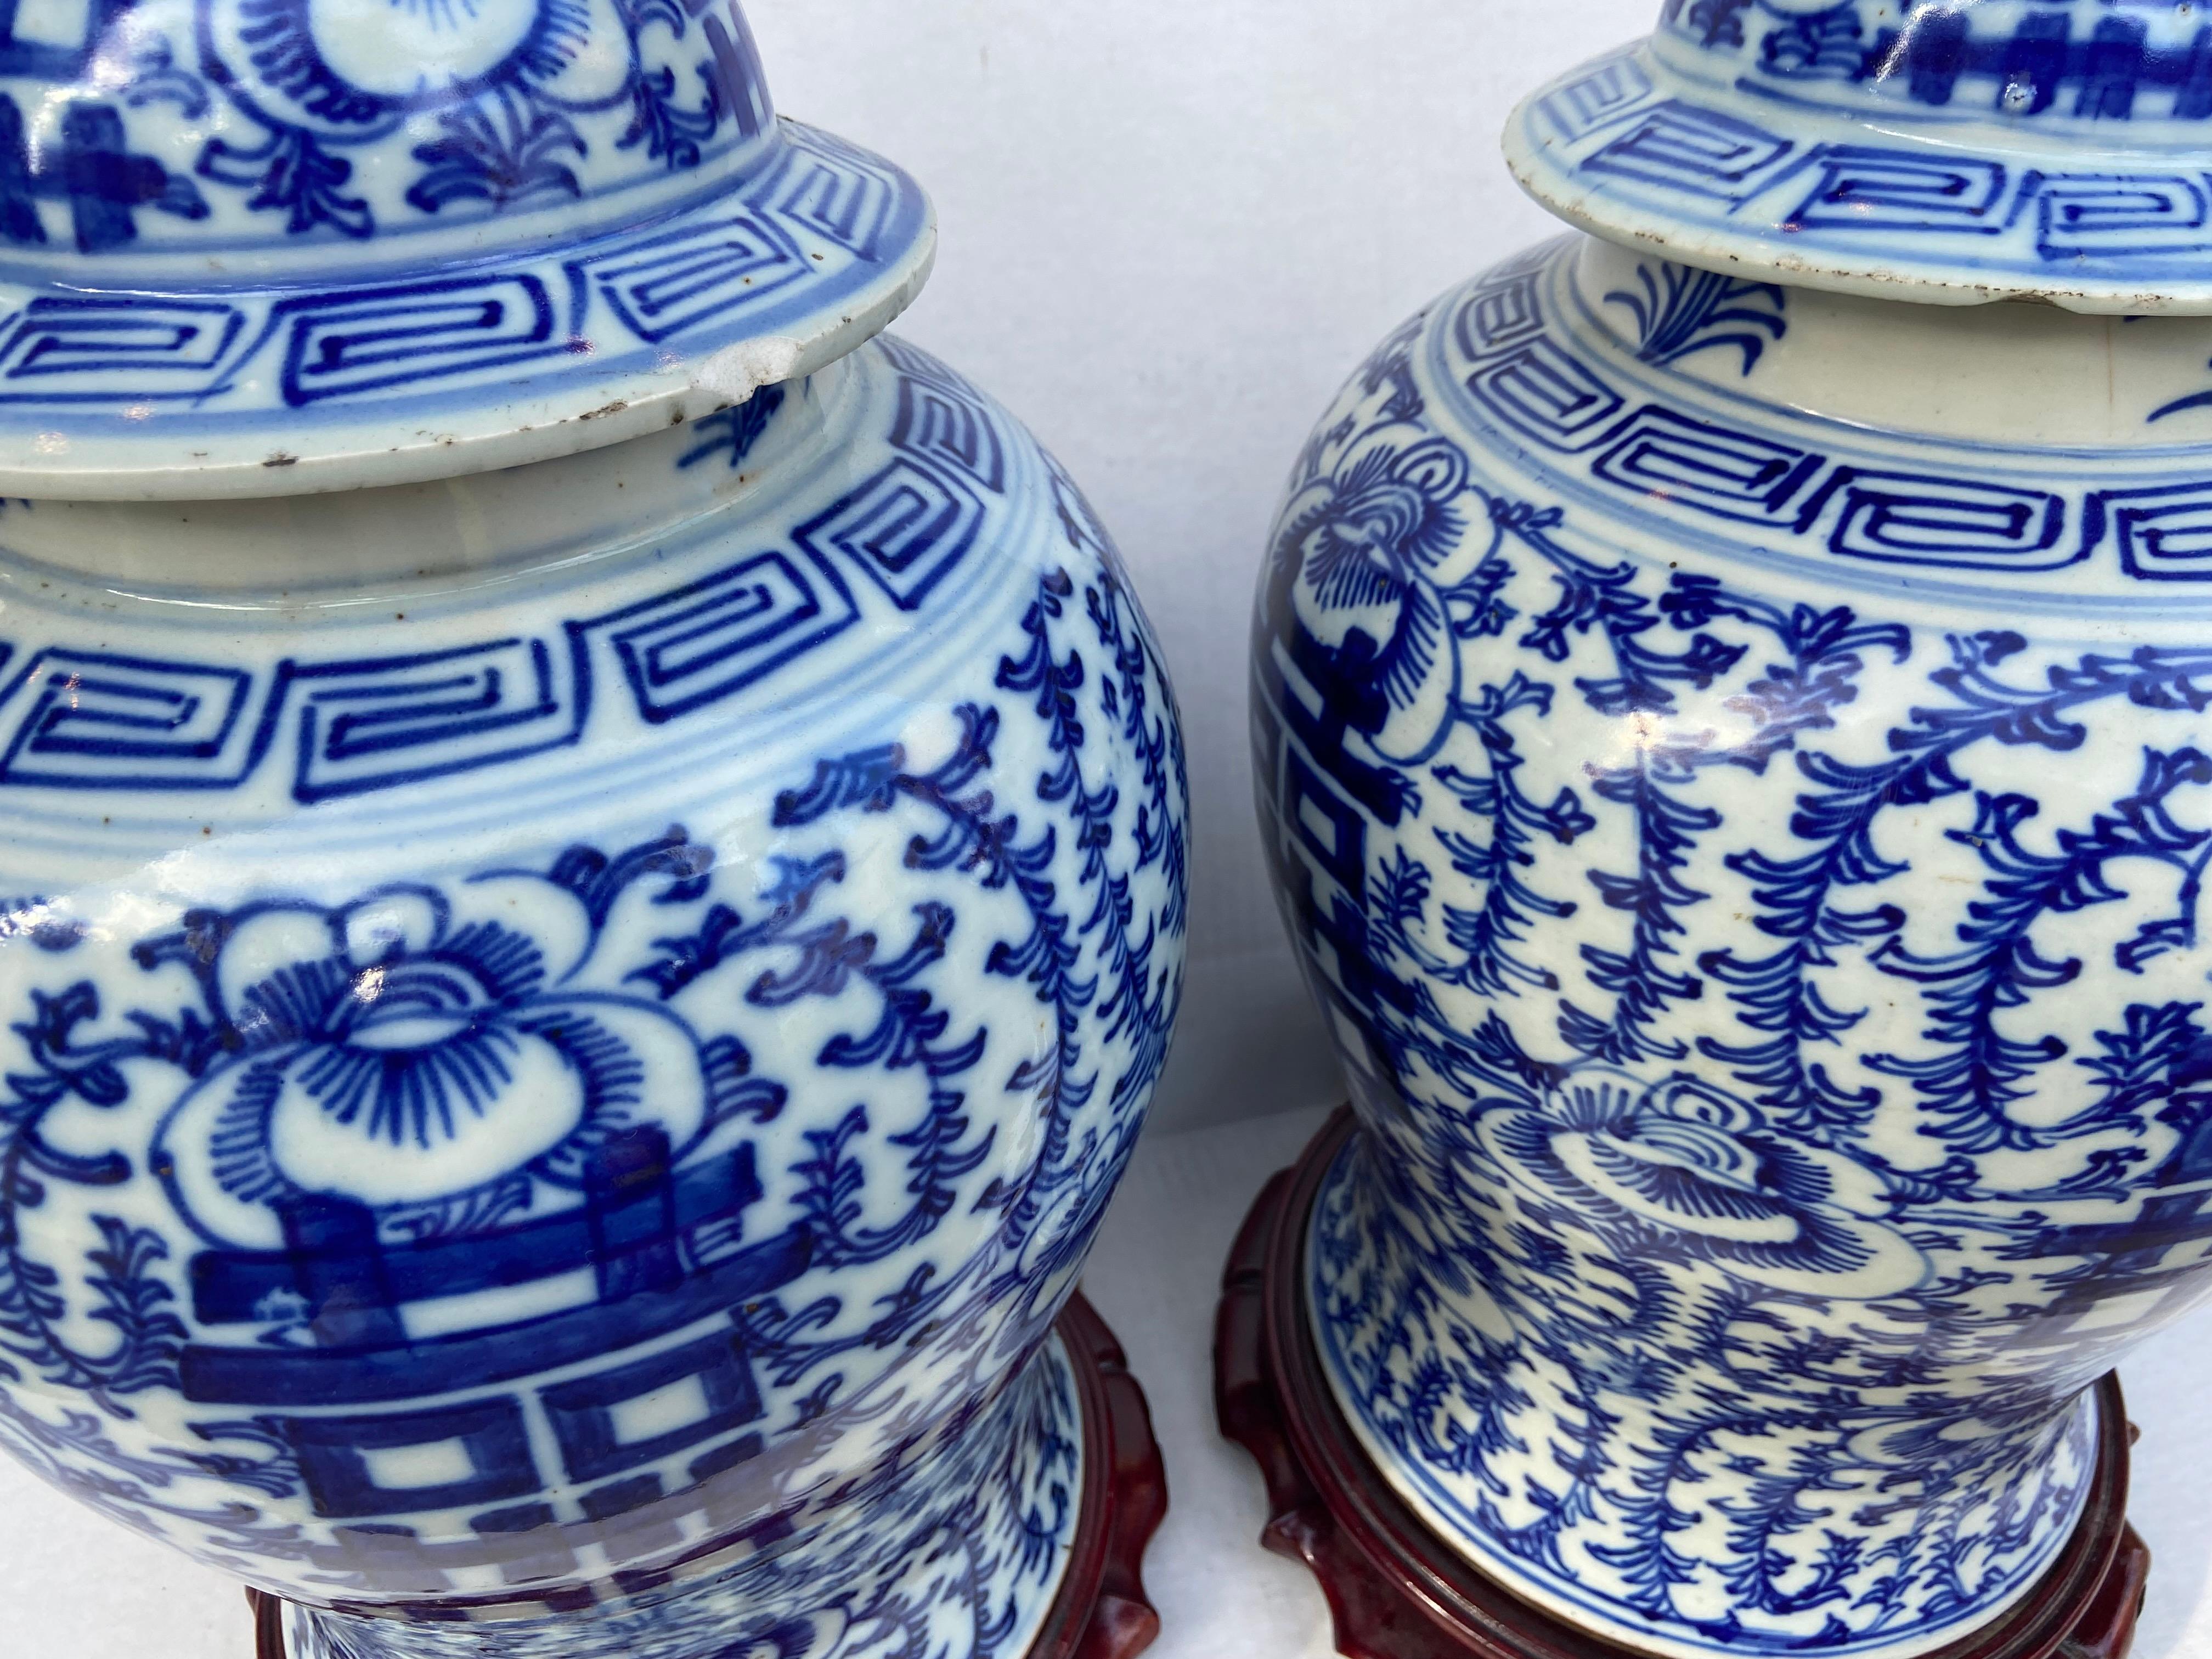 Pair of Chinese blue and white porcelain ginger jar lamps. With Double Happiness (commonly used as a decoration symbol of marriage) painted all around. Rosewood carved bases. 22